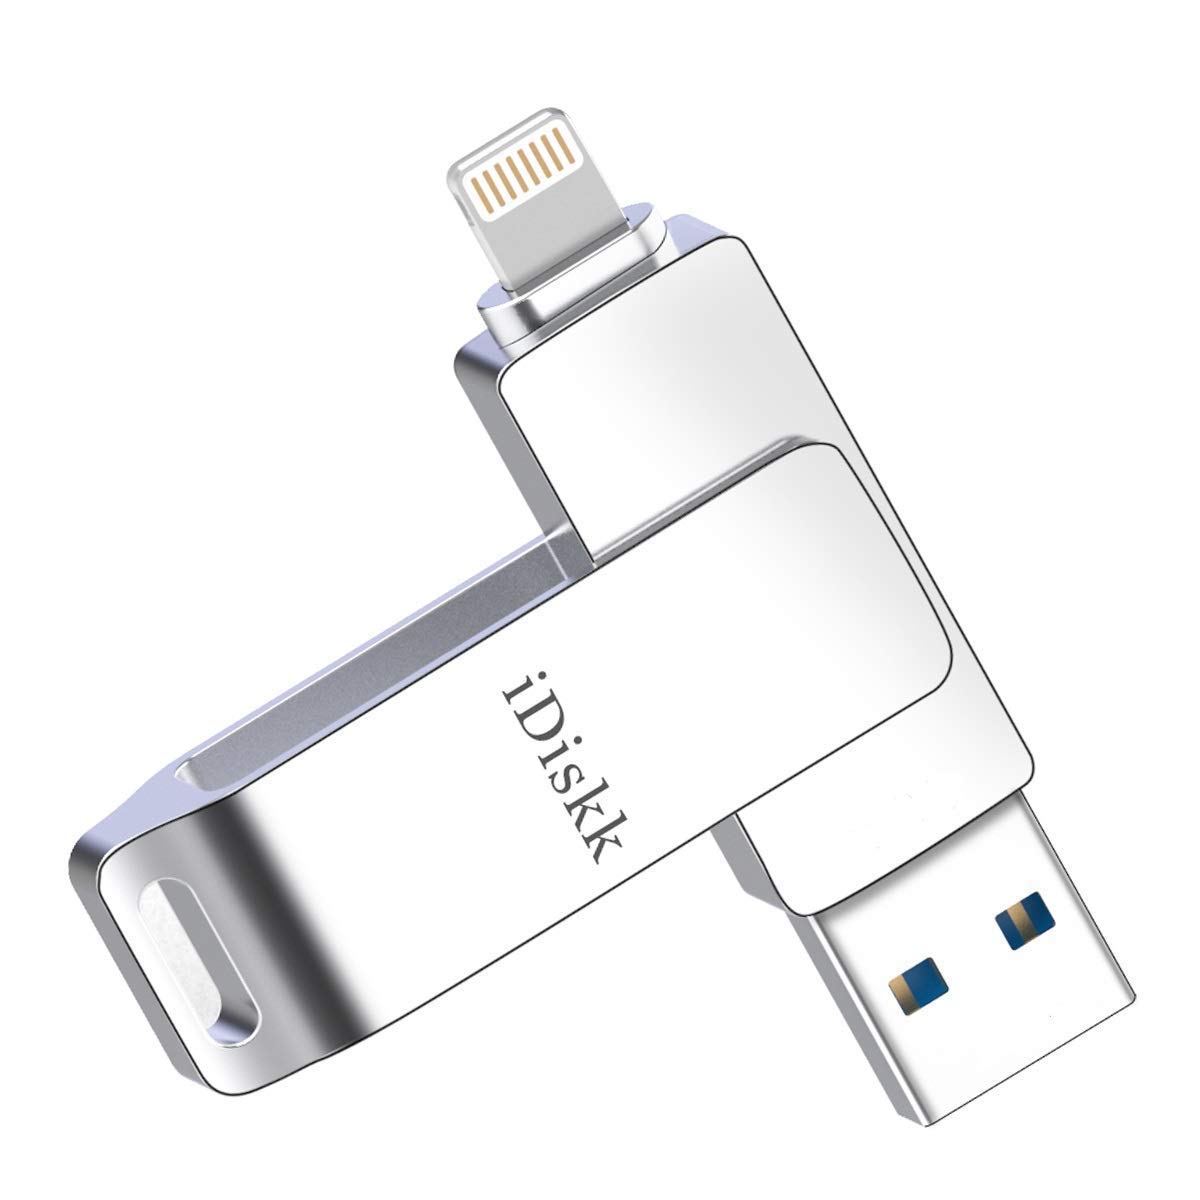 Best Usb Flash Drive For Mac And Windows